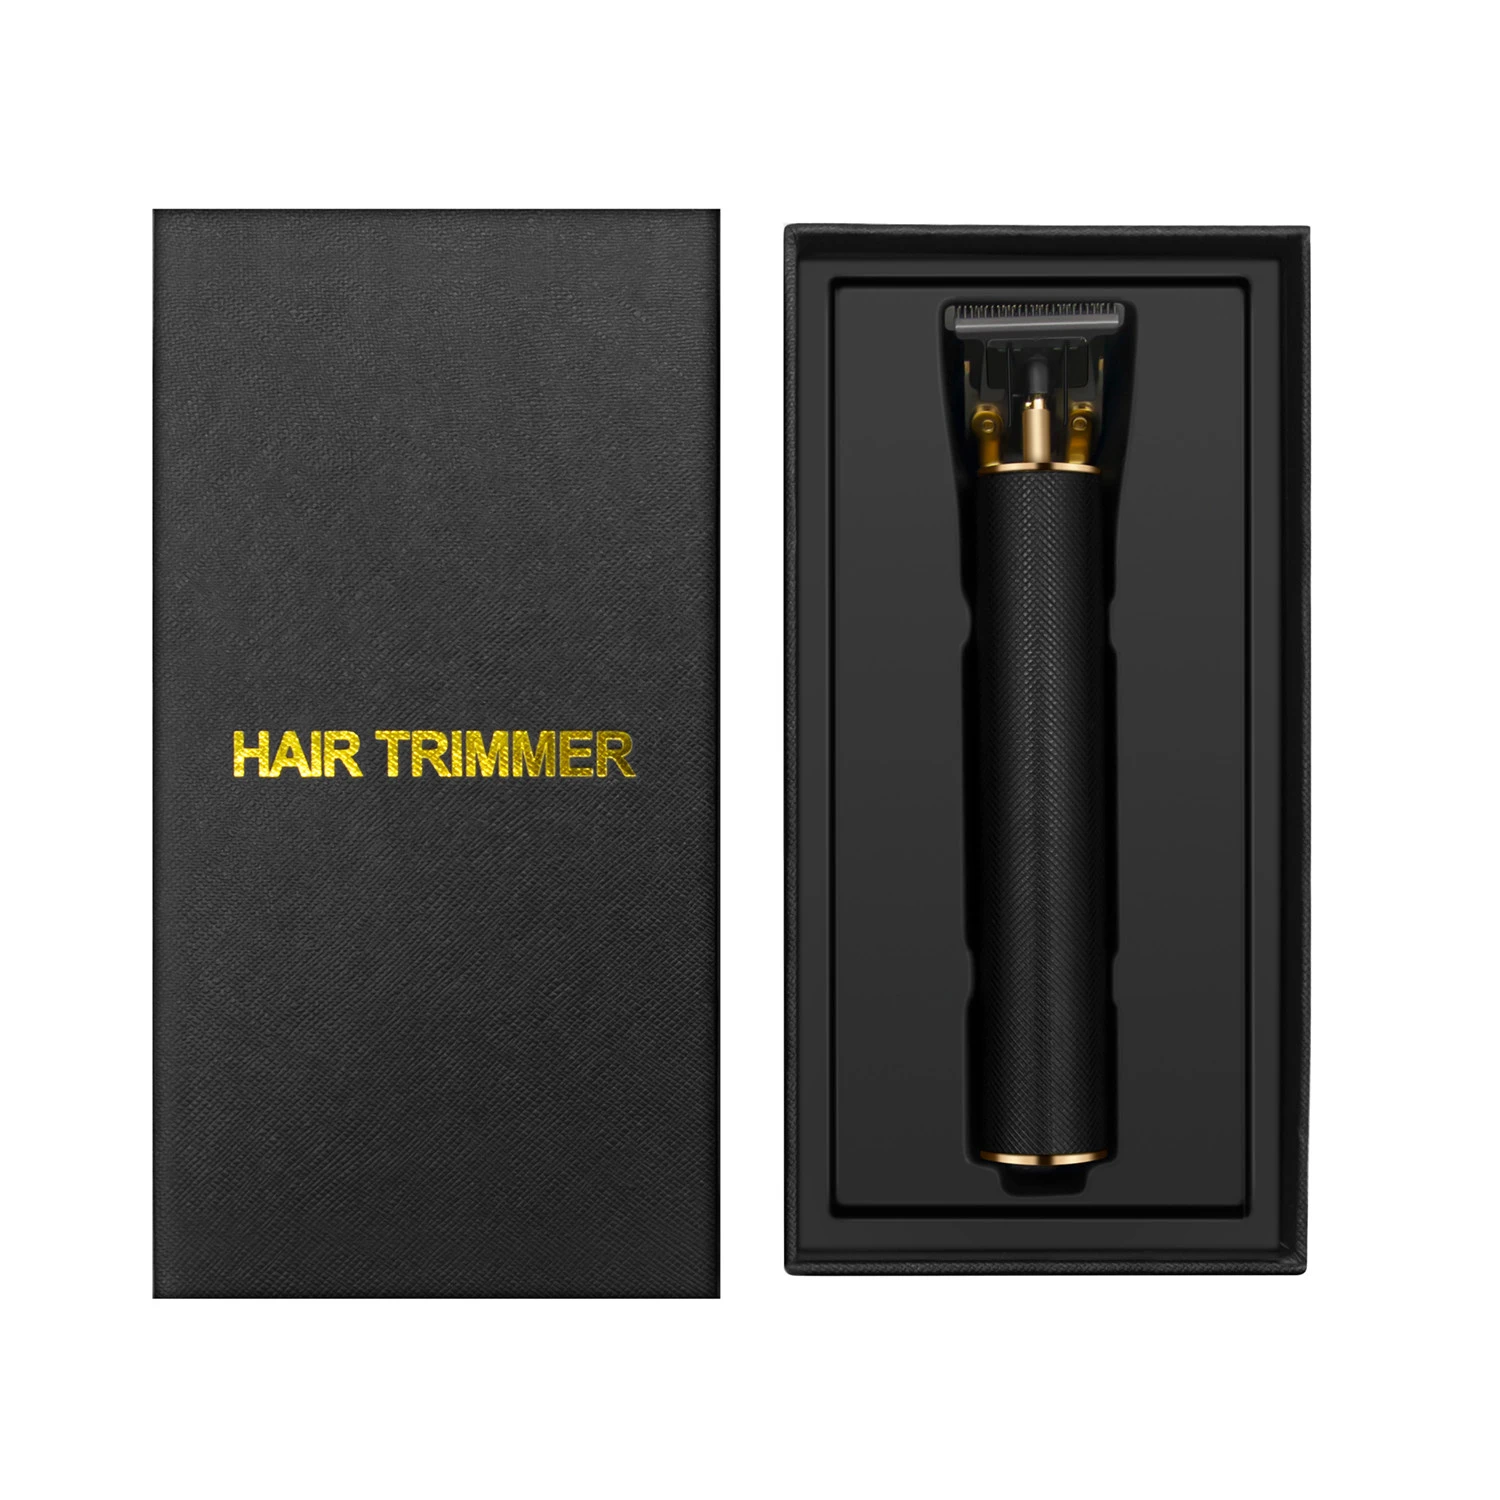 0 mm hair trimmer 11in1 multi hair trimmer pubic trimmer electric,professional hair clippers